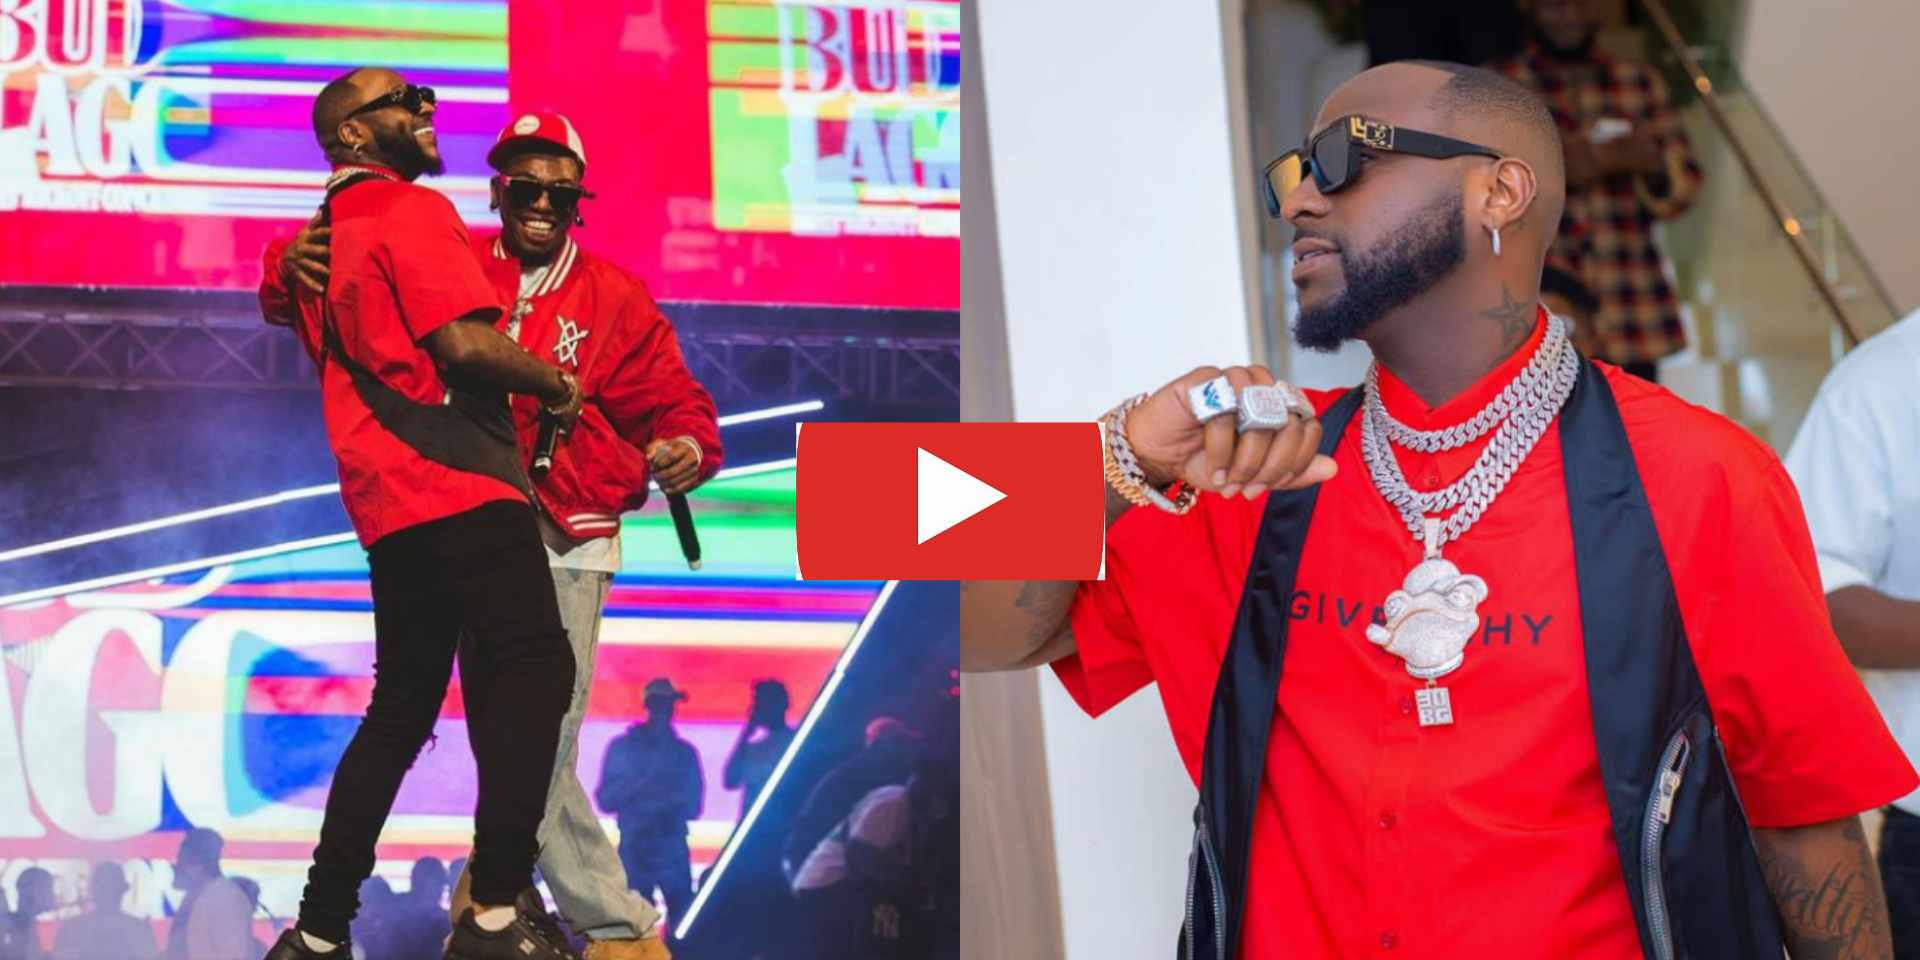 “Only where Dem de do doremi I go go” – Davido’s snippet of yet to be released song sets social media abuzz; fans call him ‘the greatest’ [Video] thumbnail